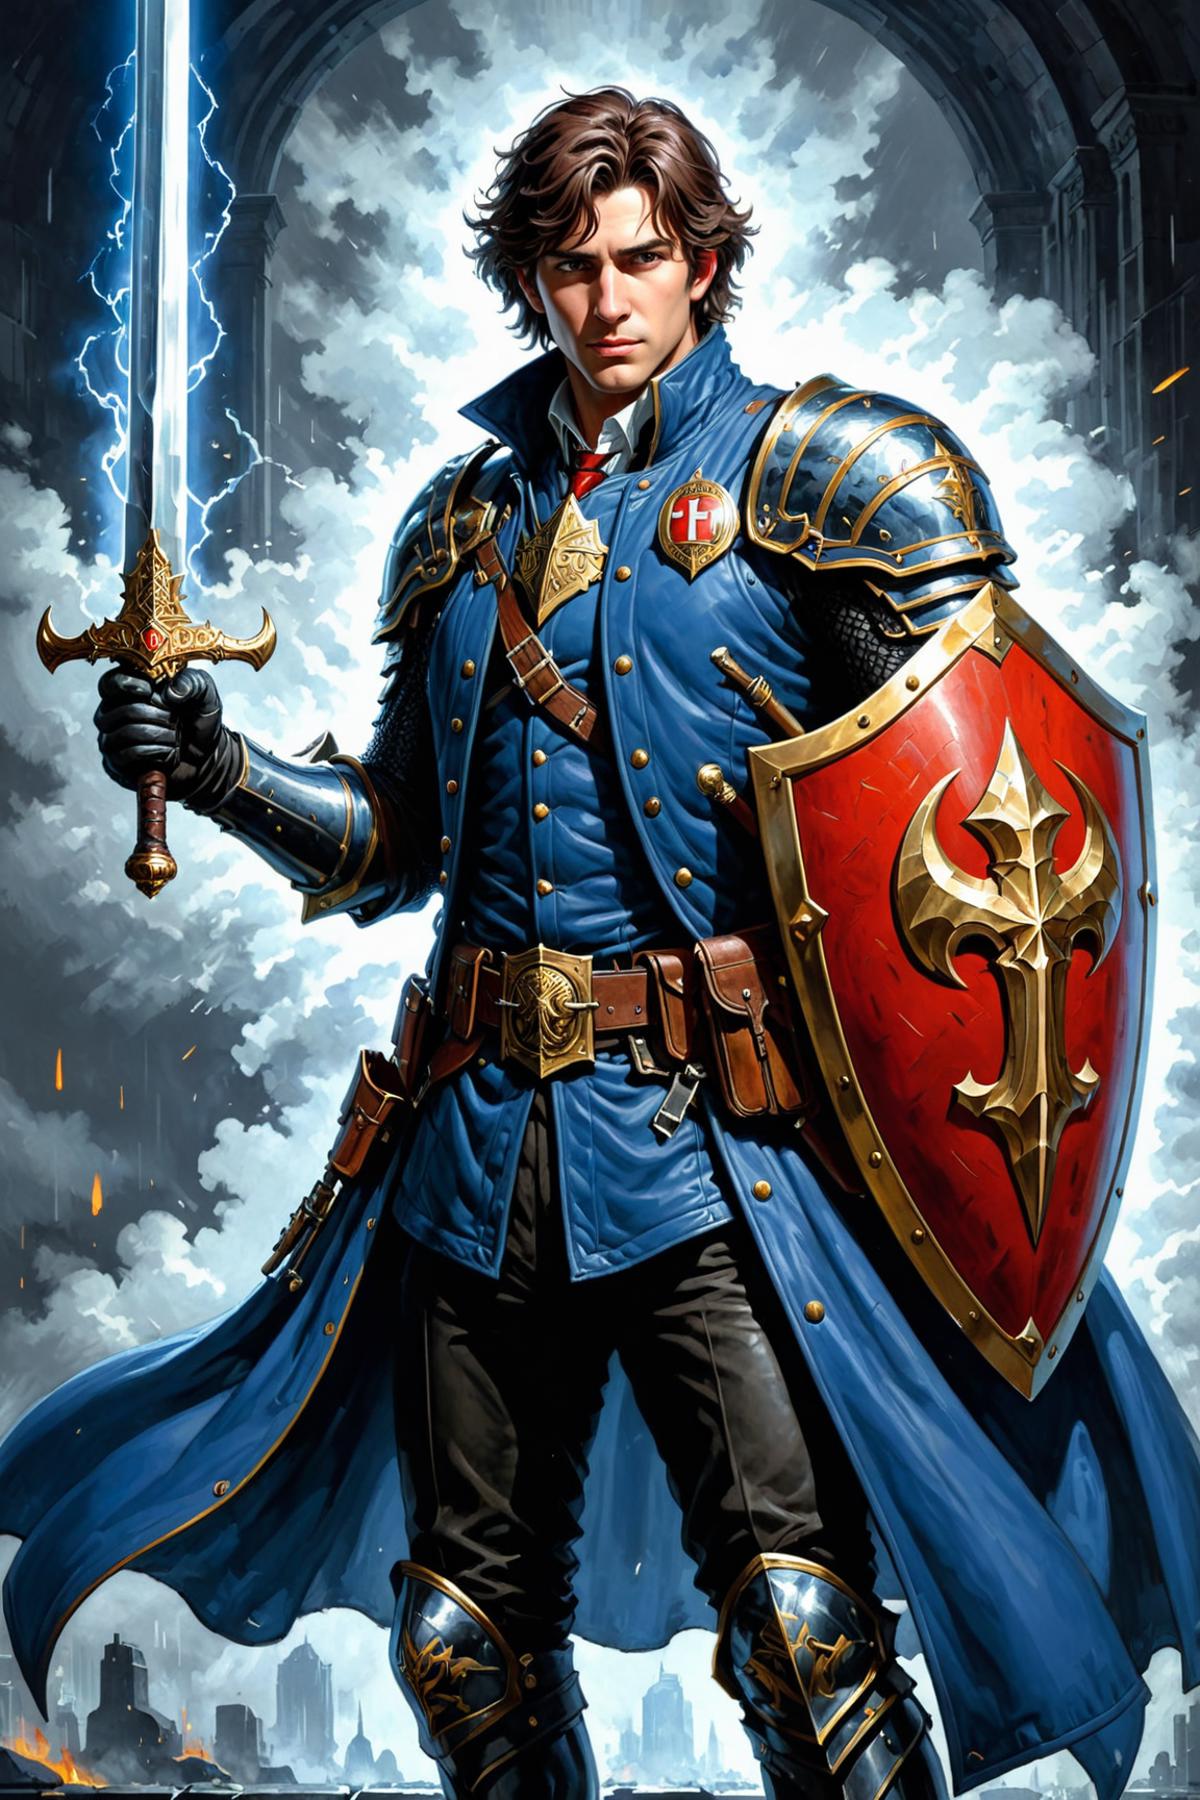 A knight in blue armor with a sword.